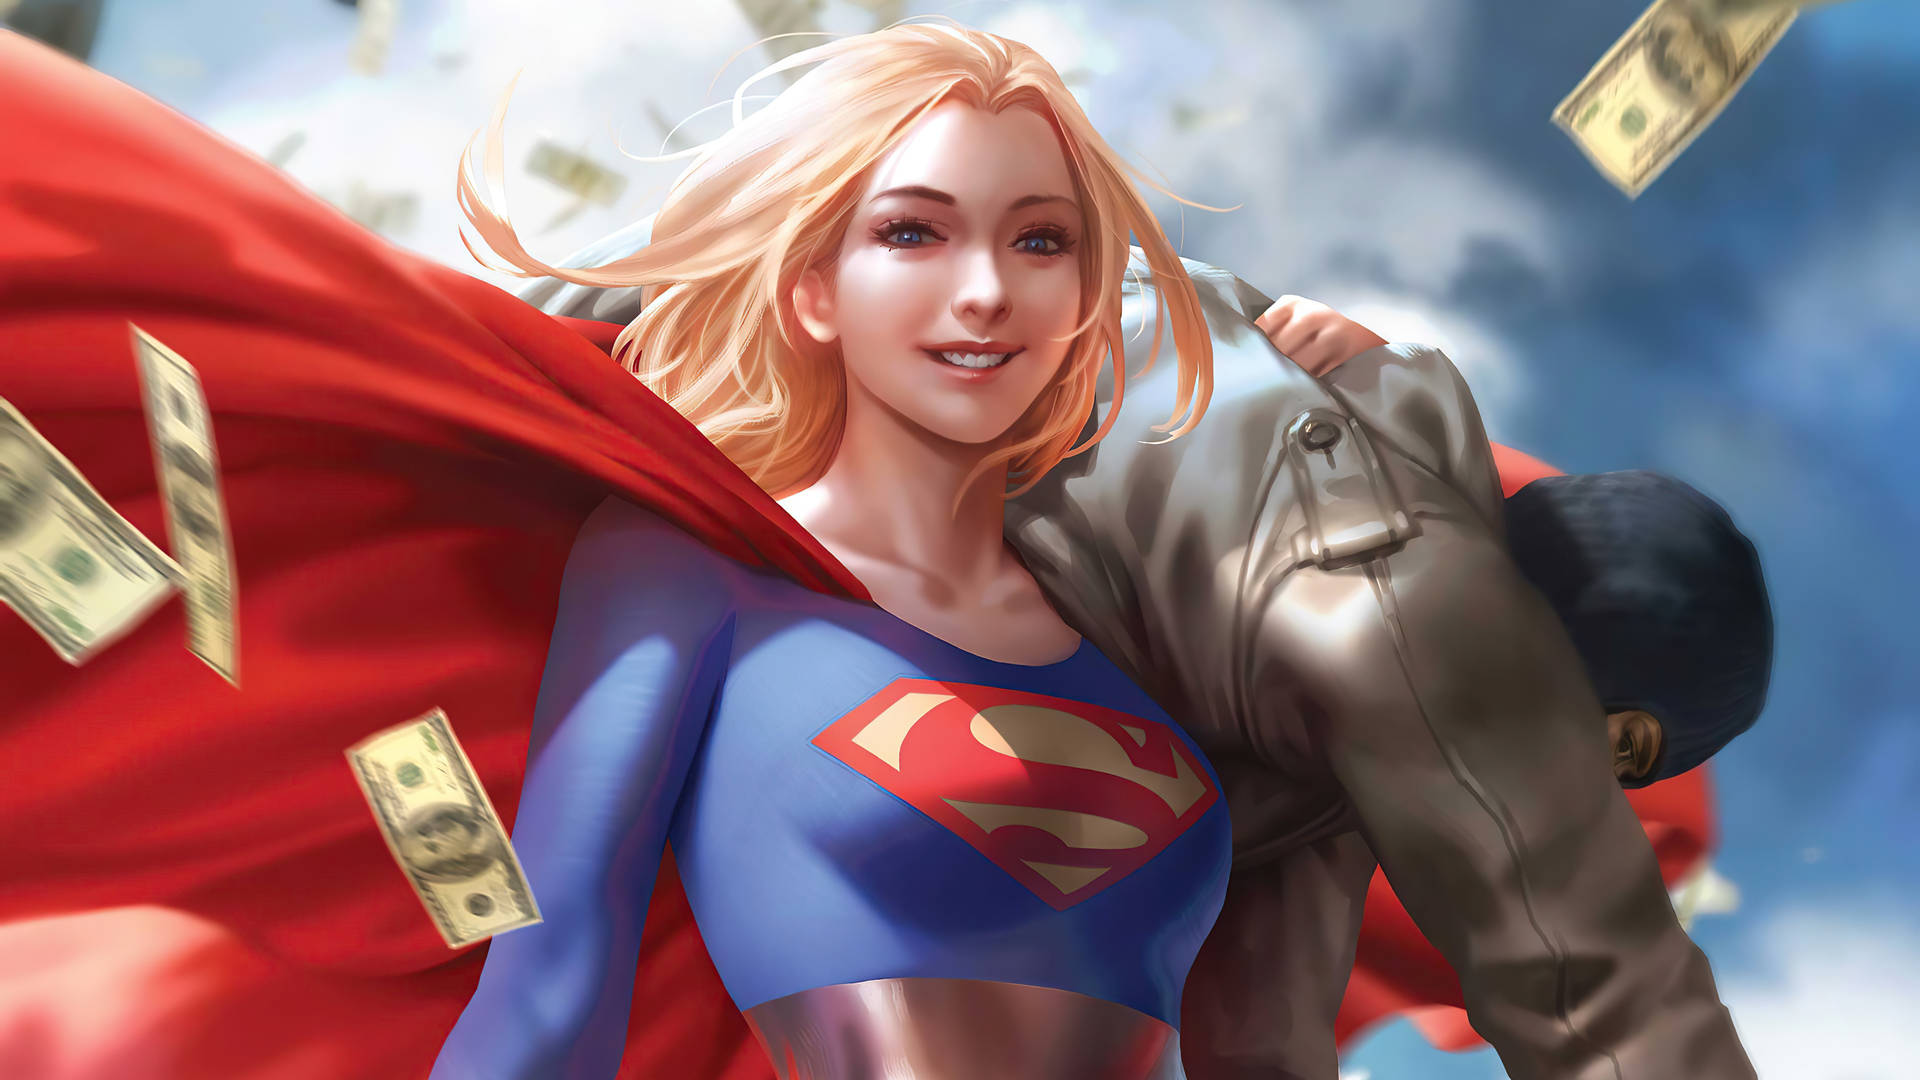 3840X2160 Supergirl Wallpaper and Background